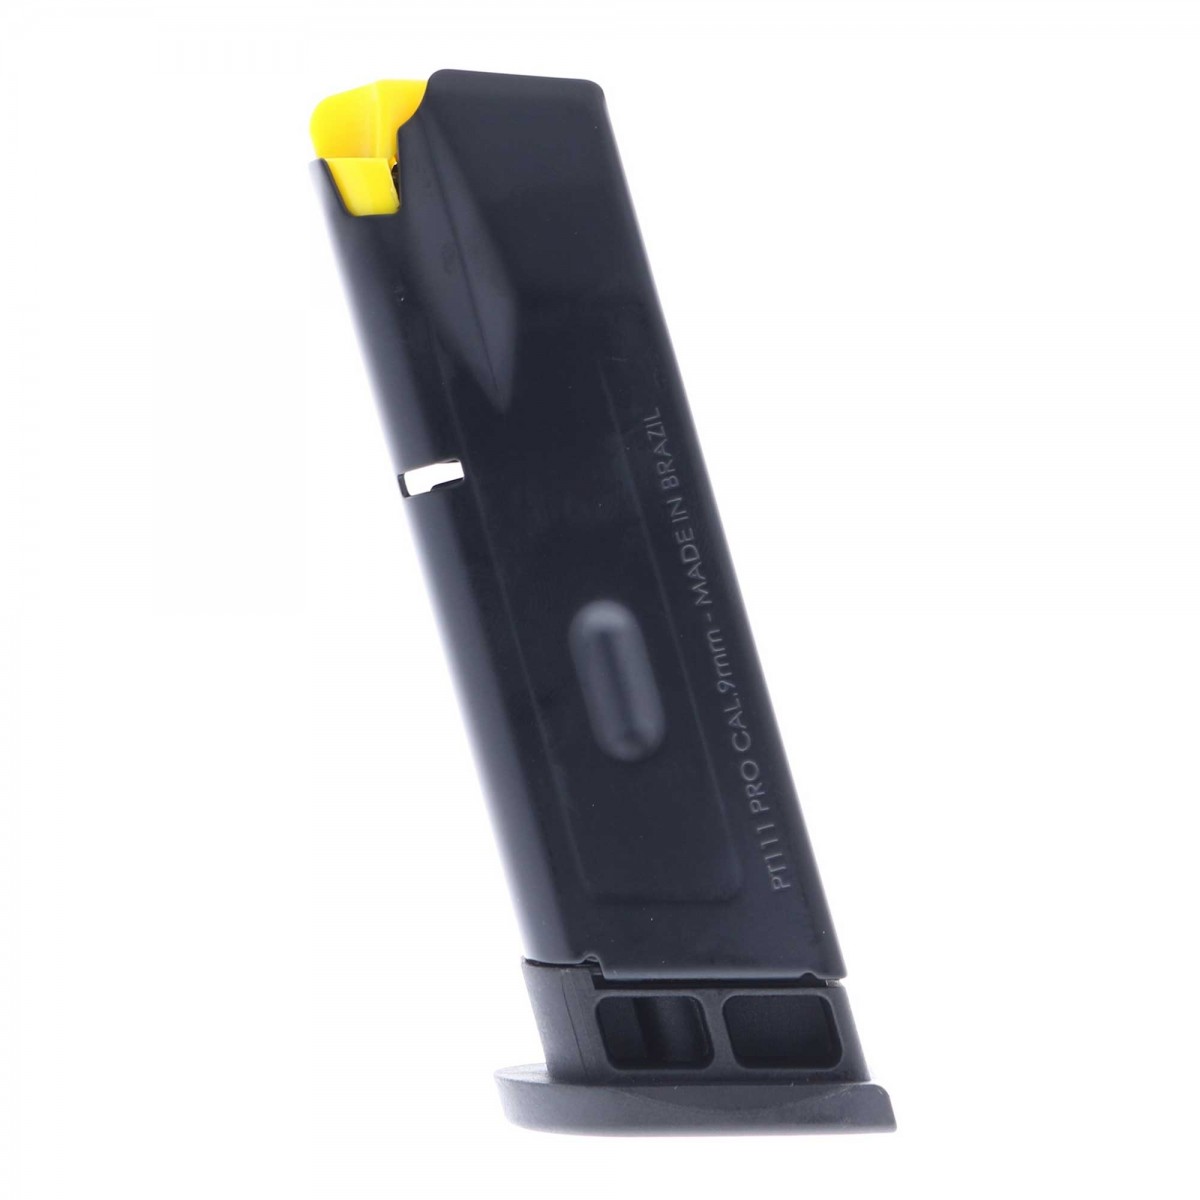 Taurus G3 9mm 10 Rounds Magazine for sale online 